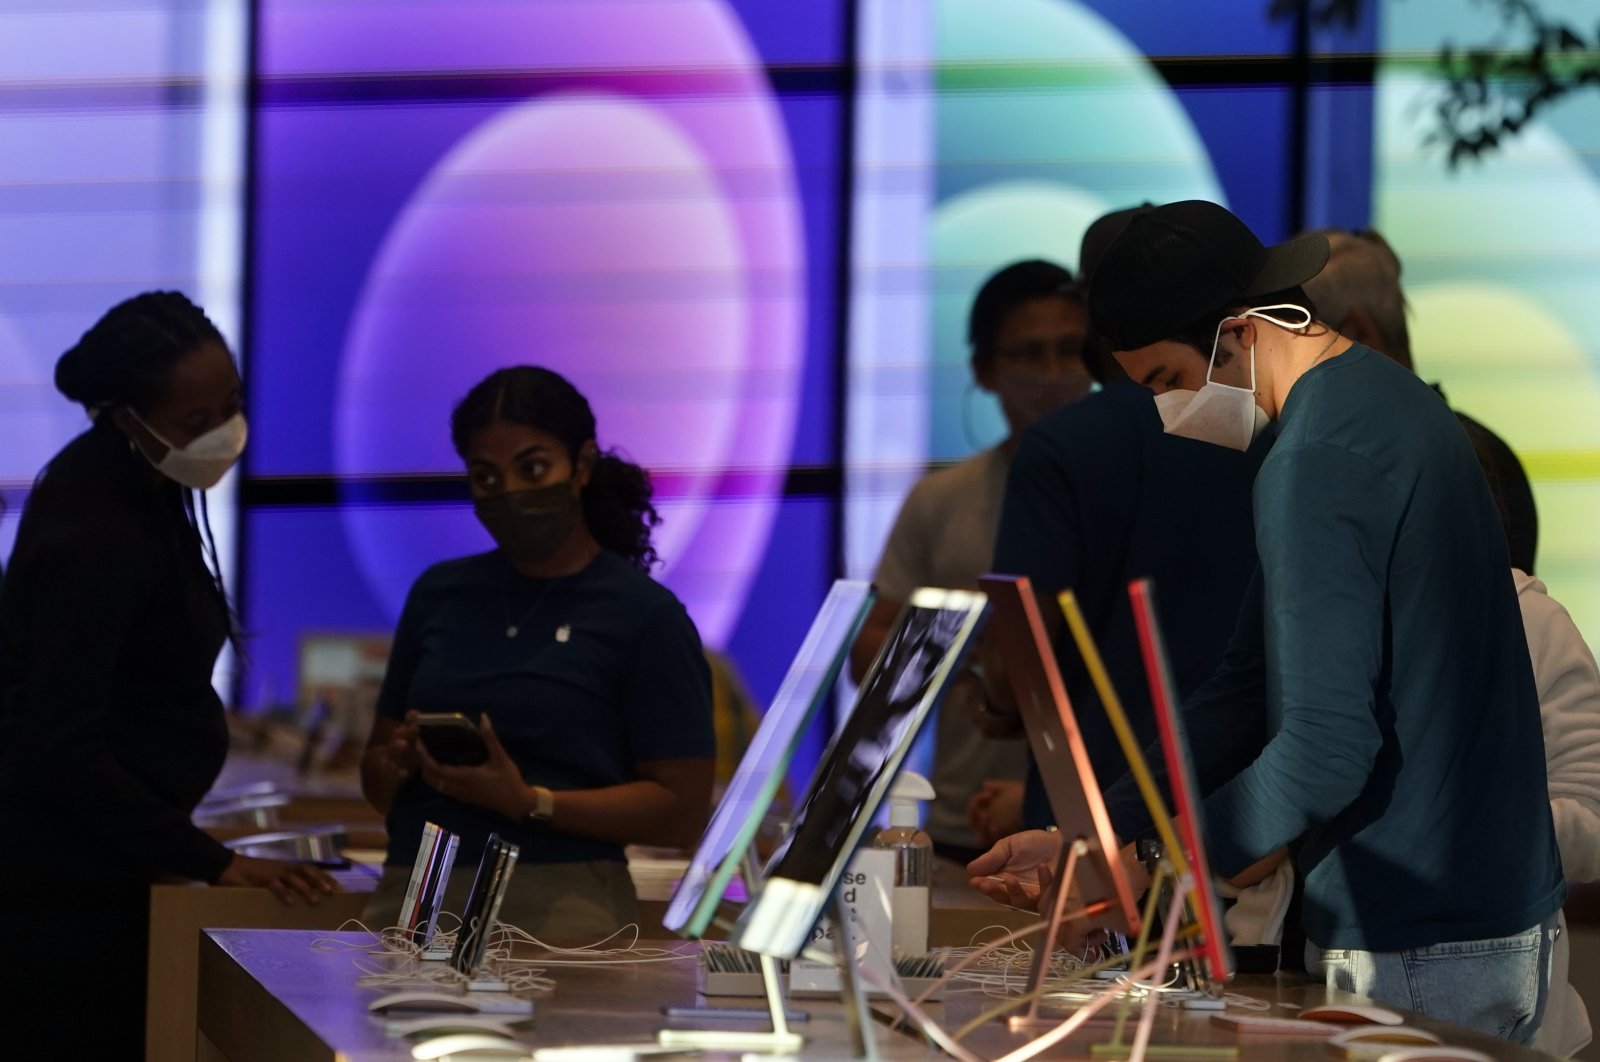 Workers and customers wear masks inside an Apple Store amid the COVID-19 pandemic on The Promenade, in Santa Monica, California, U.S., June 9, 2021. (AP Photo)